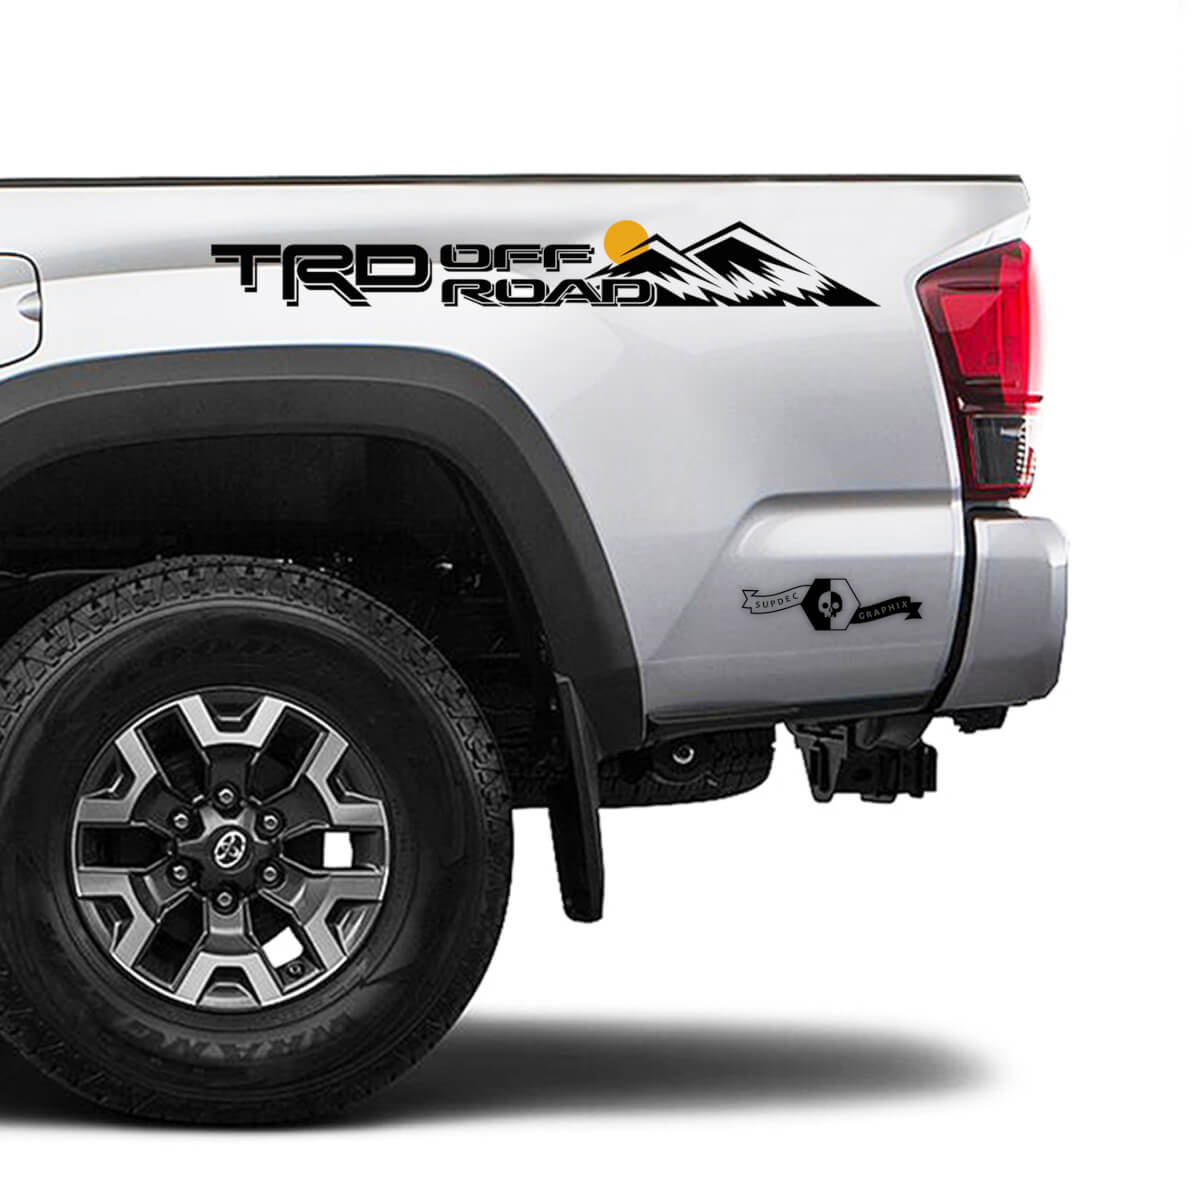 TRD 4x4 Off Road TOYOTA  Colour Sun Moon Mountains Decals Stickers for Tacoma Tundra 4Runner Hilux side